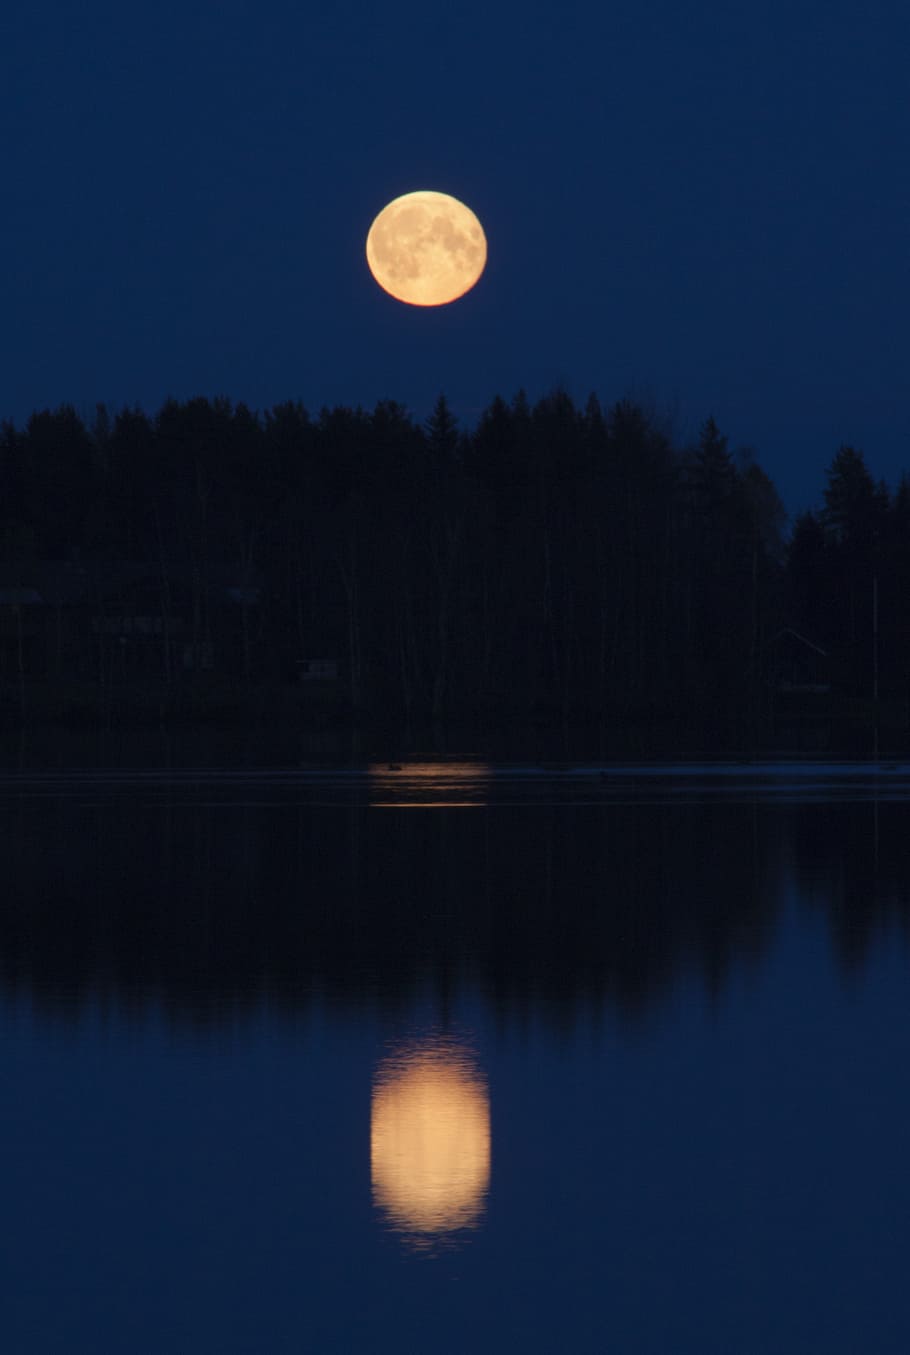 yellow full moon, moon, moonrise, evening, dark, reflection, sky, tranquility, scenics - nature, beauty in nature